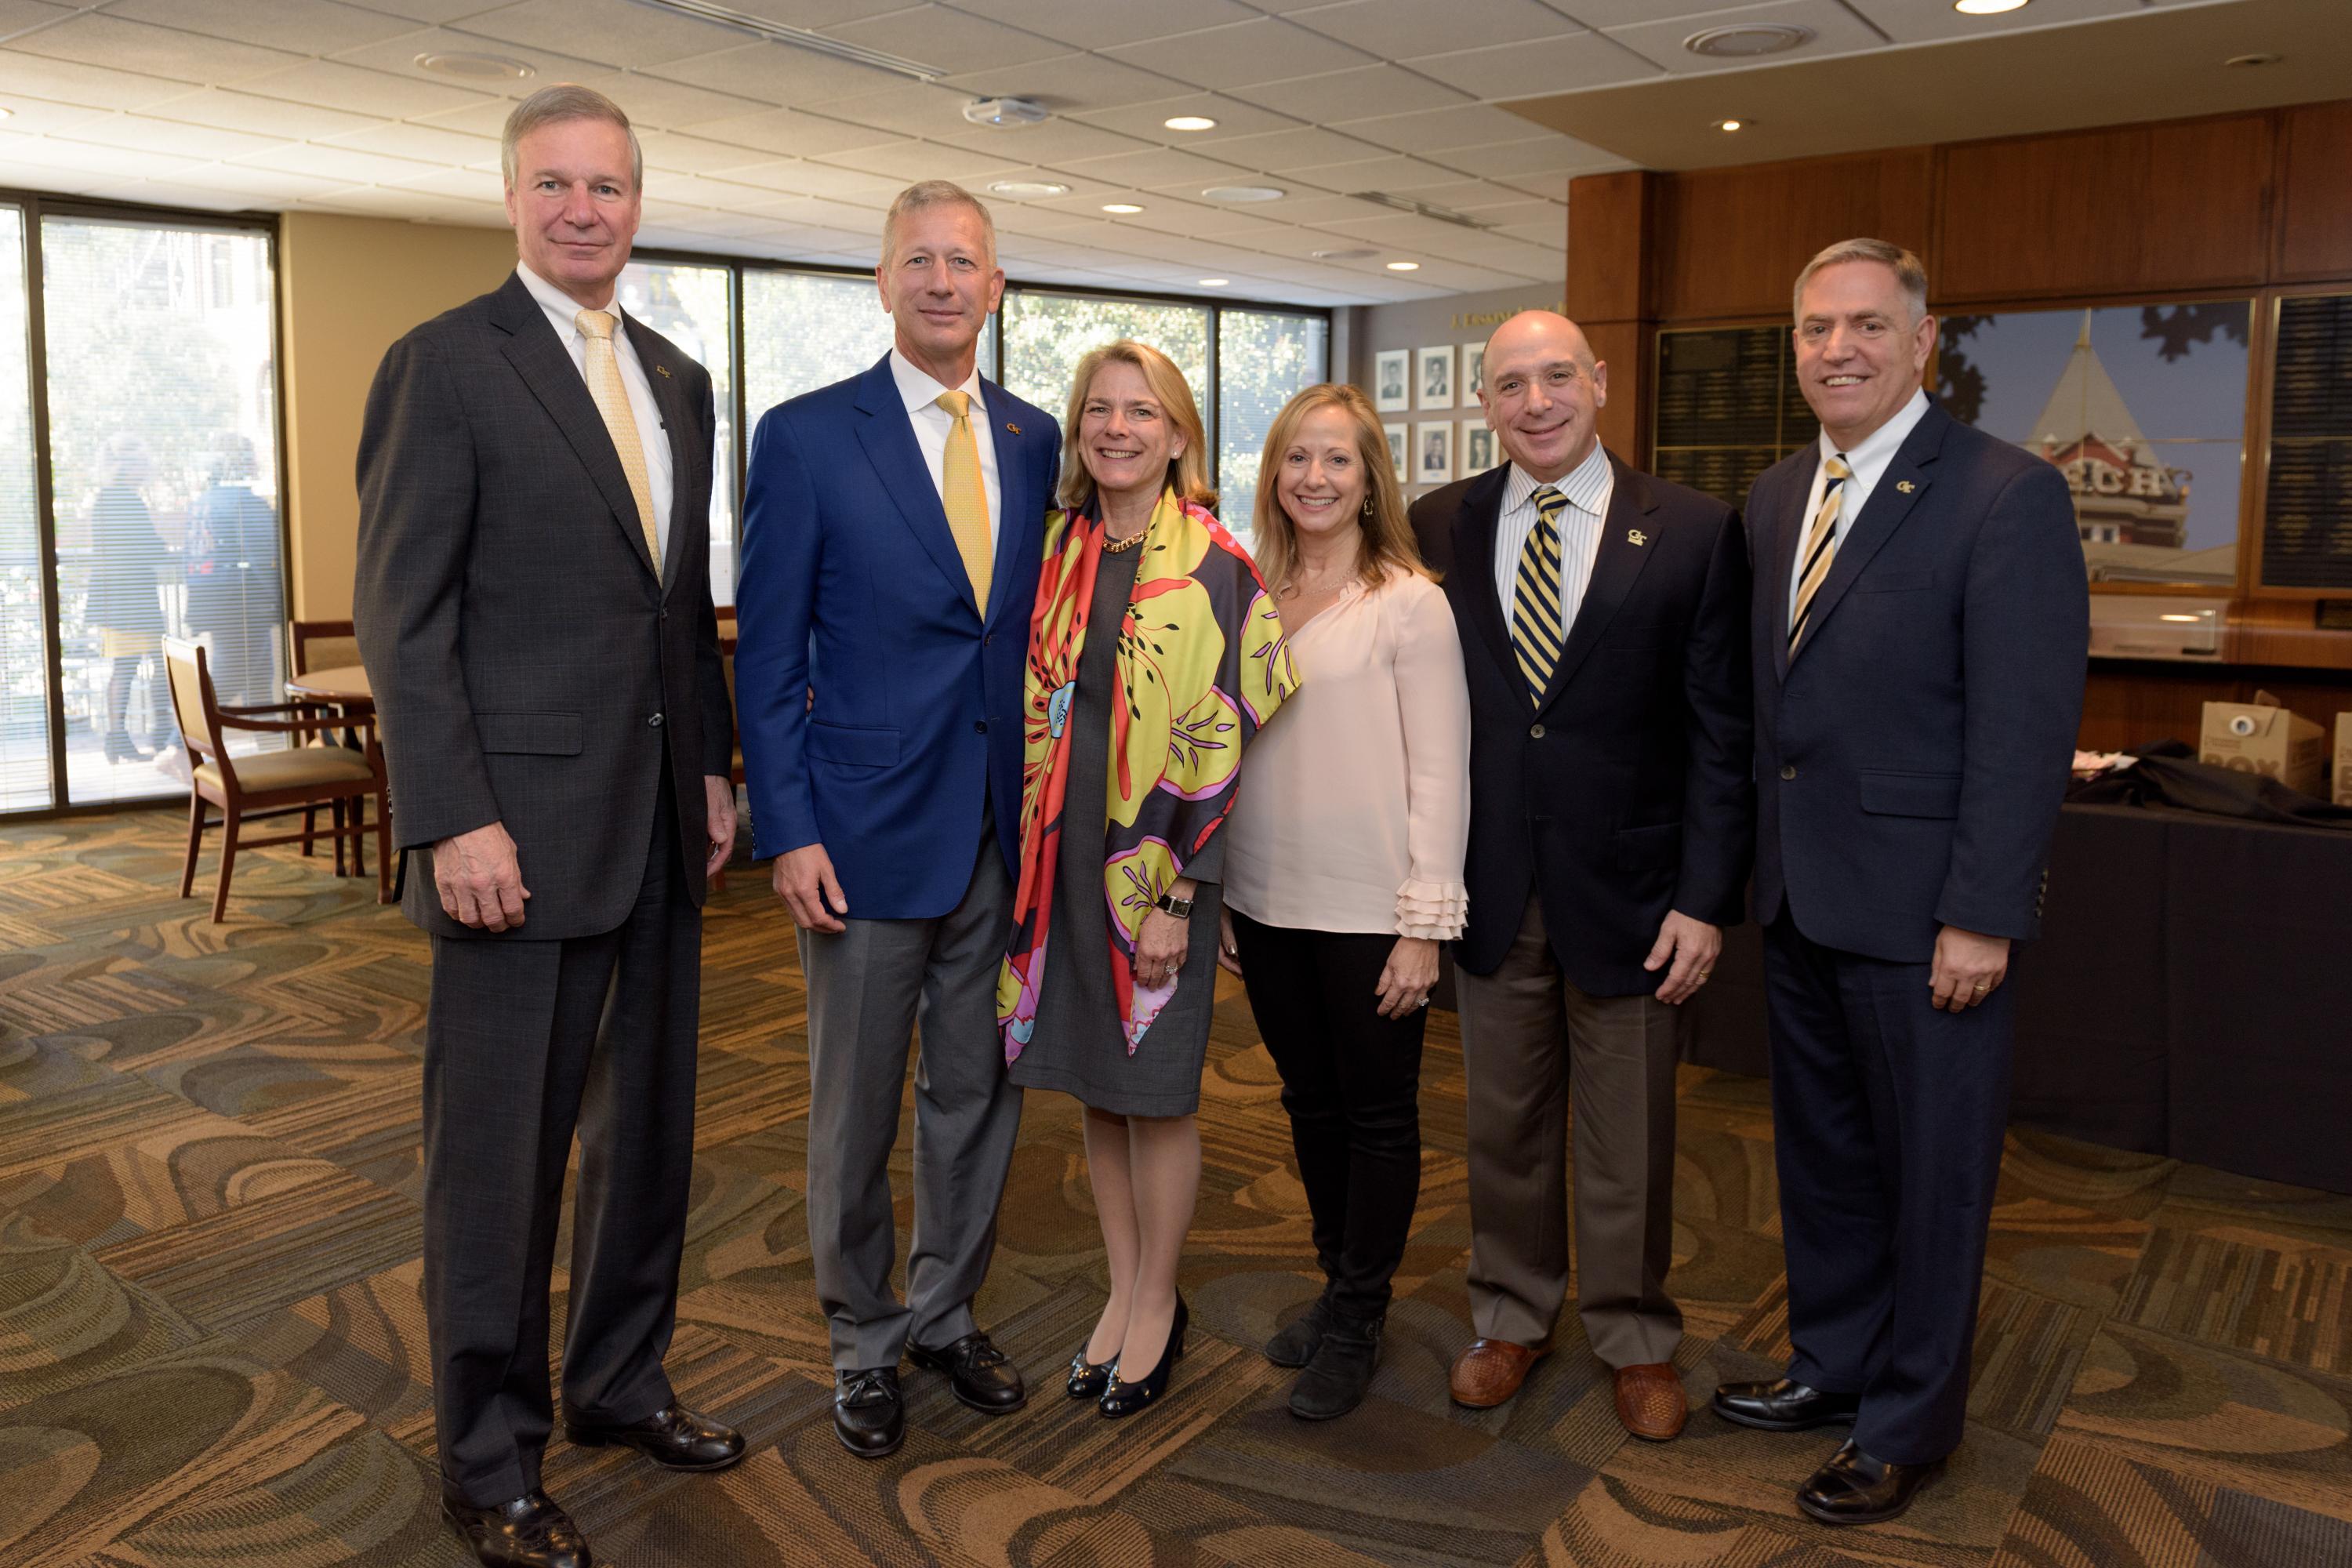 Current parents Lance and Julie Fritz of Omaha, Nebraska, and Darlene and Eric Brandt of Corona Del Mar, California, with President G.P. “Bud” Peterson (left) and Dean of Students John Stein (right), make history at the Oct. 27 Parent’s Board meeting.